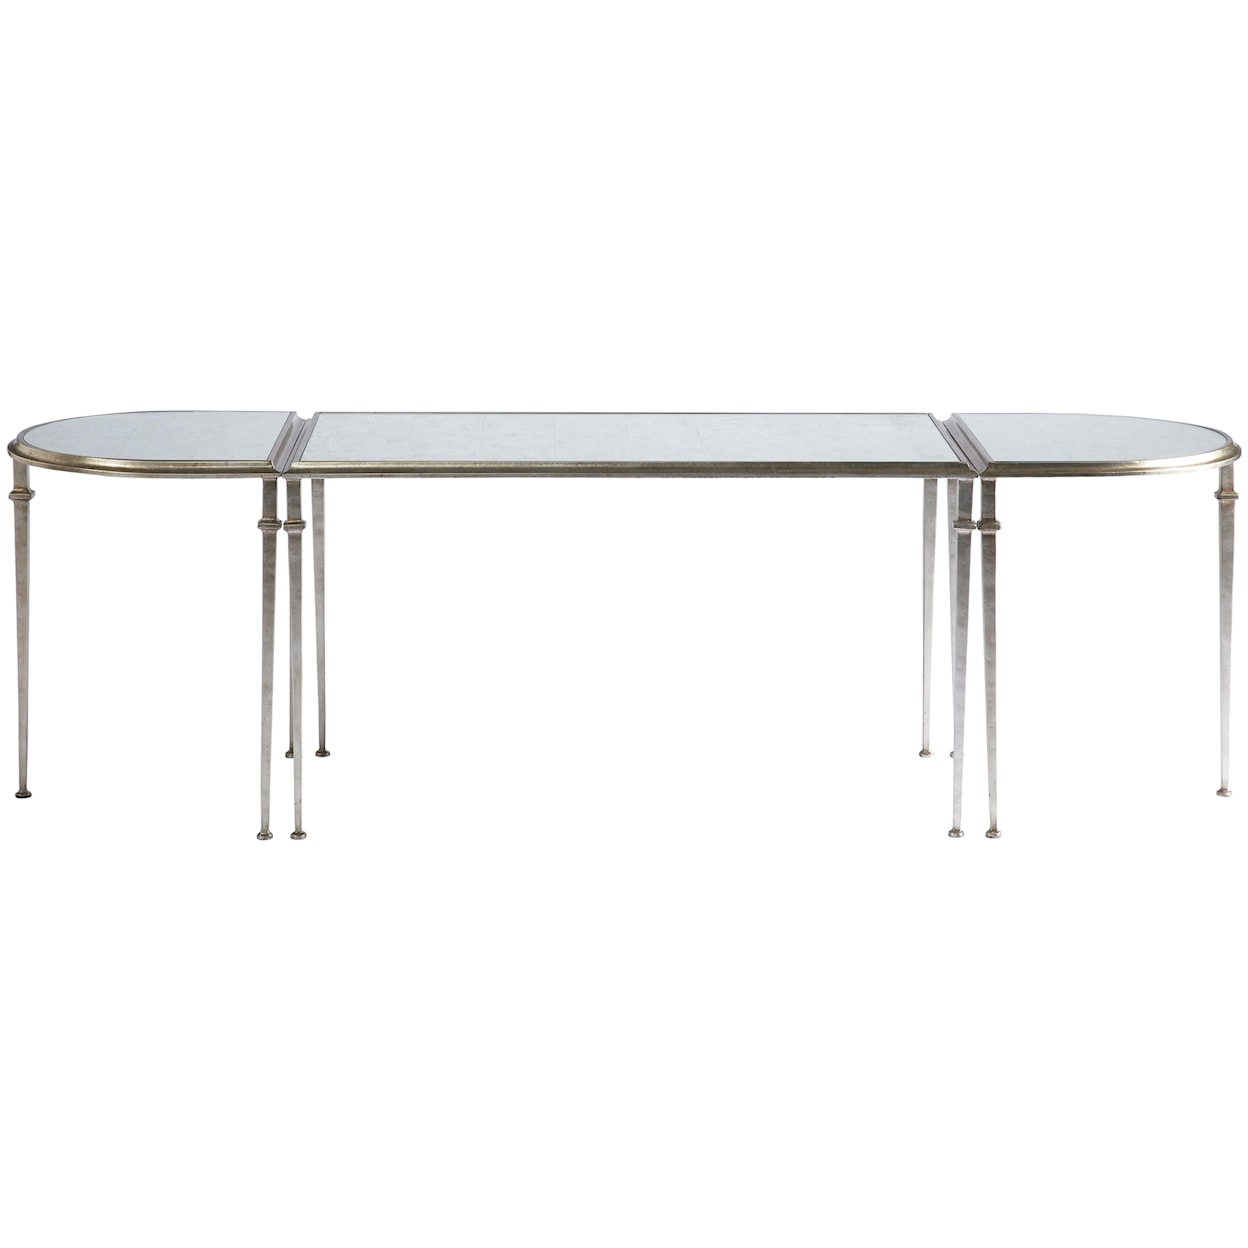 Lillian August Wood Tria Cocktail Table